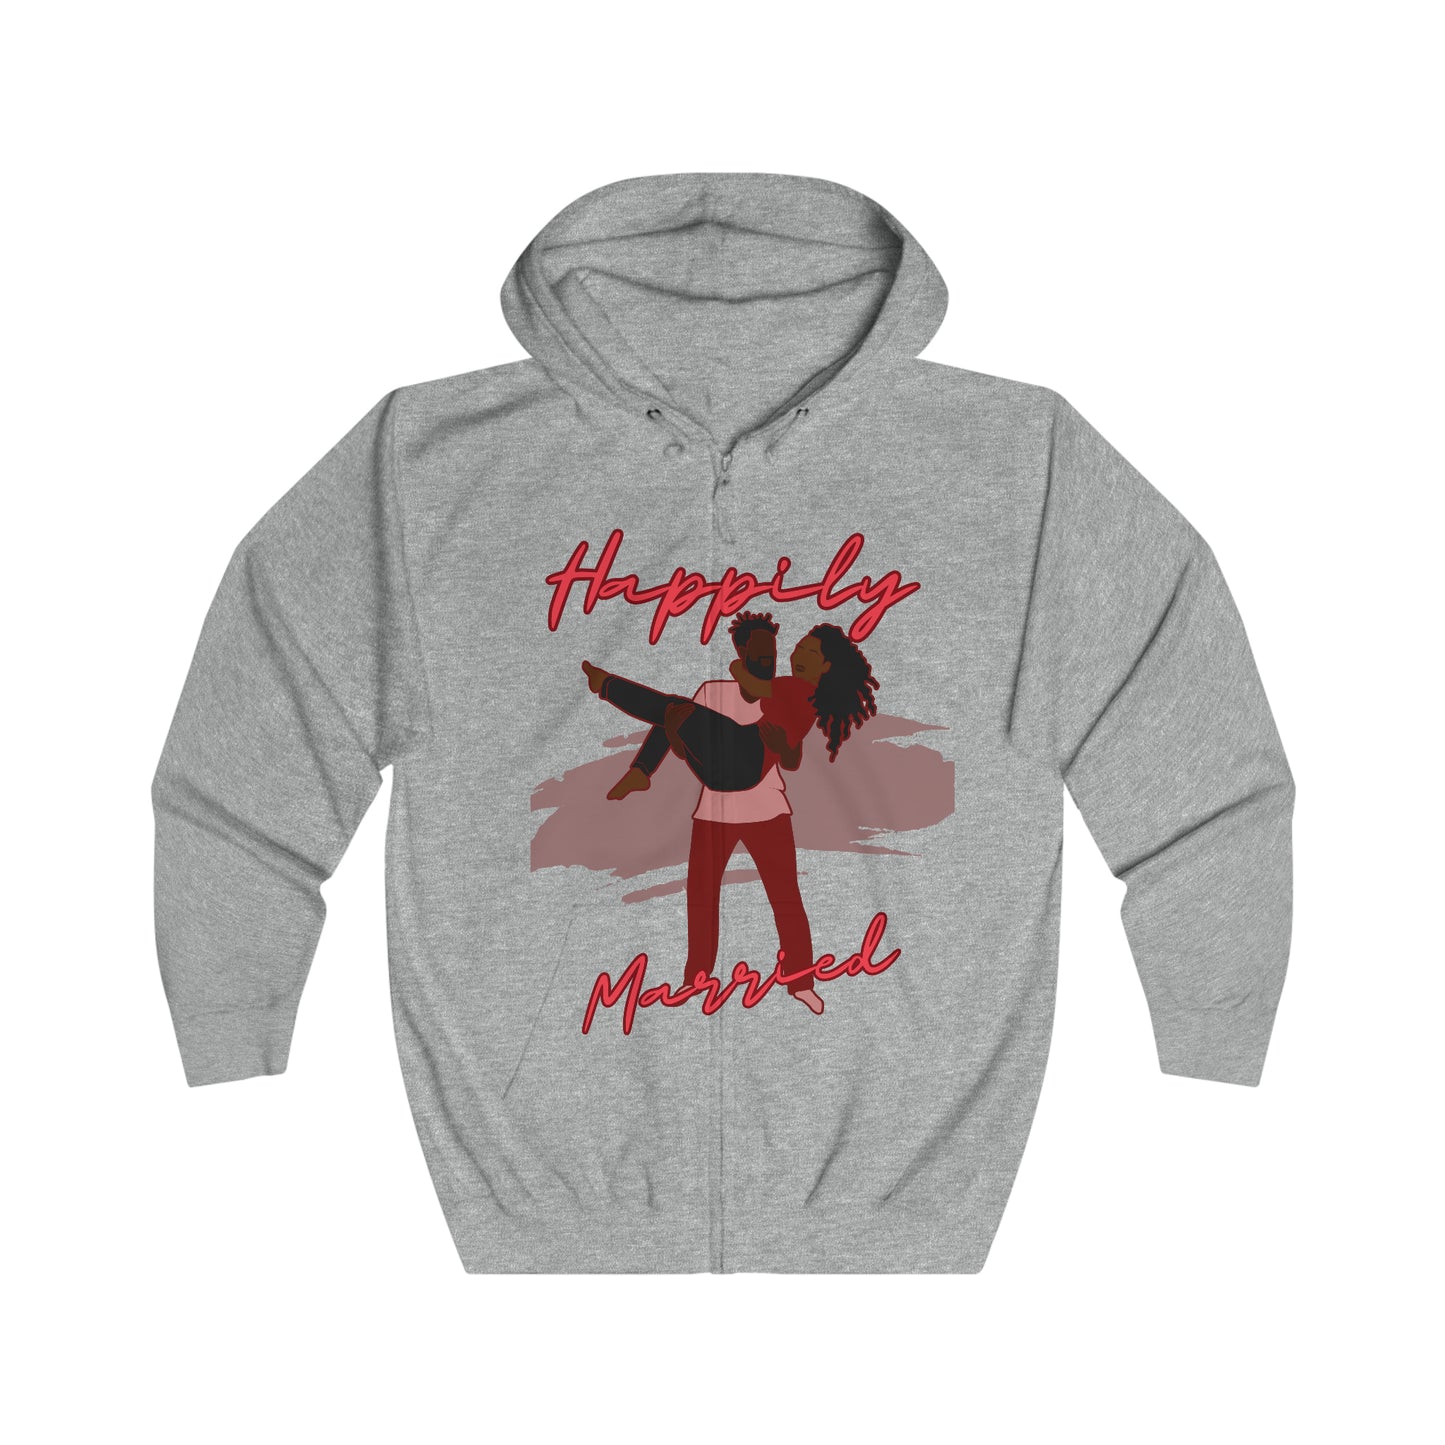 Public Happily Married Unisex Hoodie: Celebrate Marriage Status with Joy, Love, and Bliss While Matching